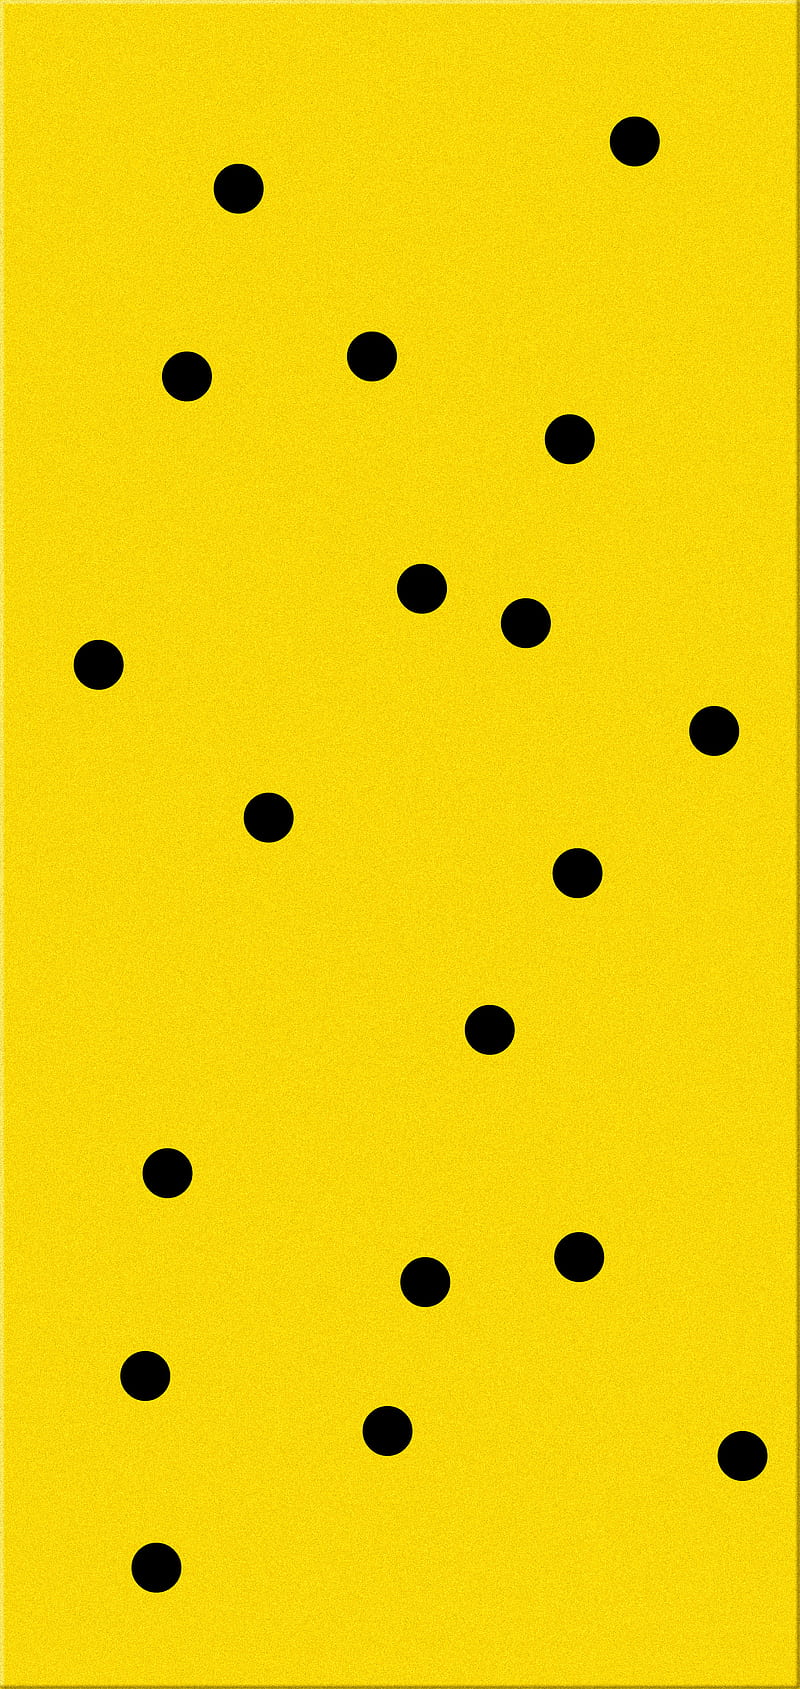 Punch Hole, black hole, bullet holes, galaxy, note 10, note 10 plus, samsung, samsung note 10, u, yellow, HD phone wallpaper